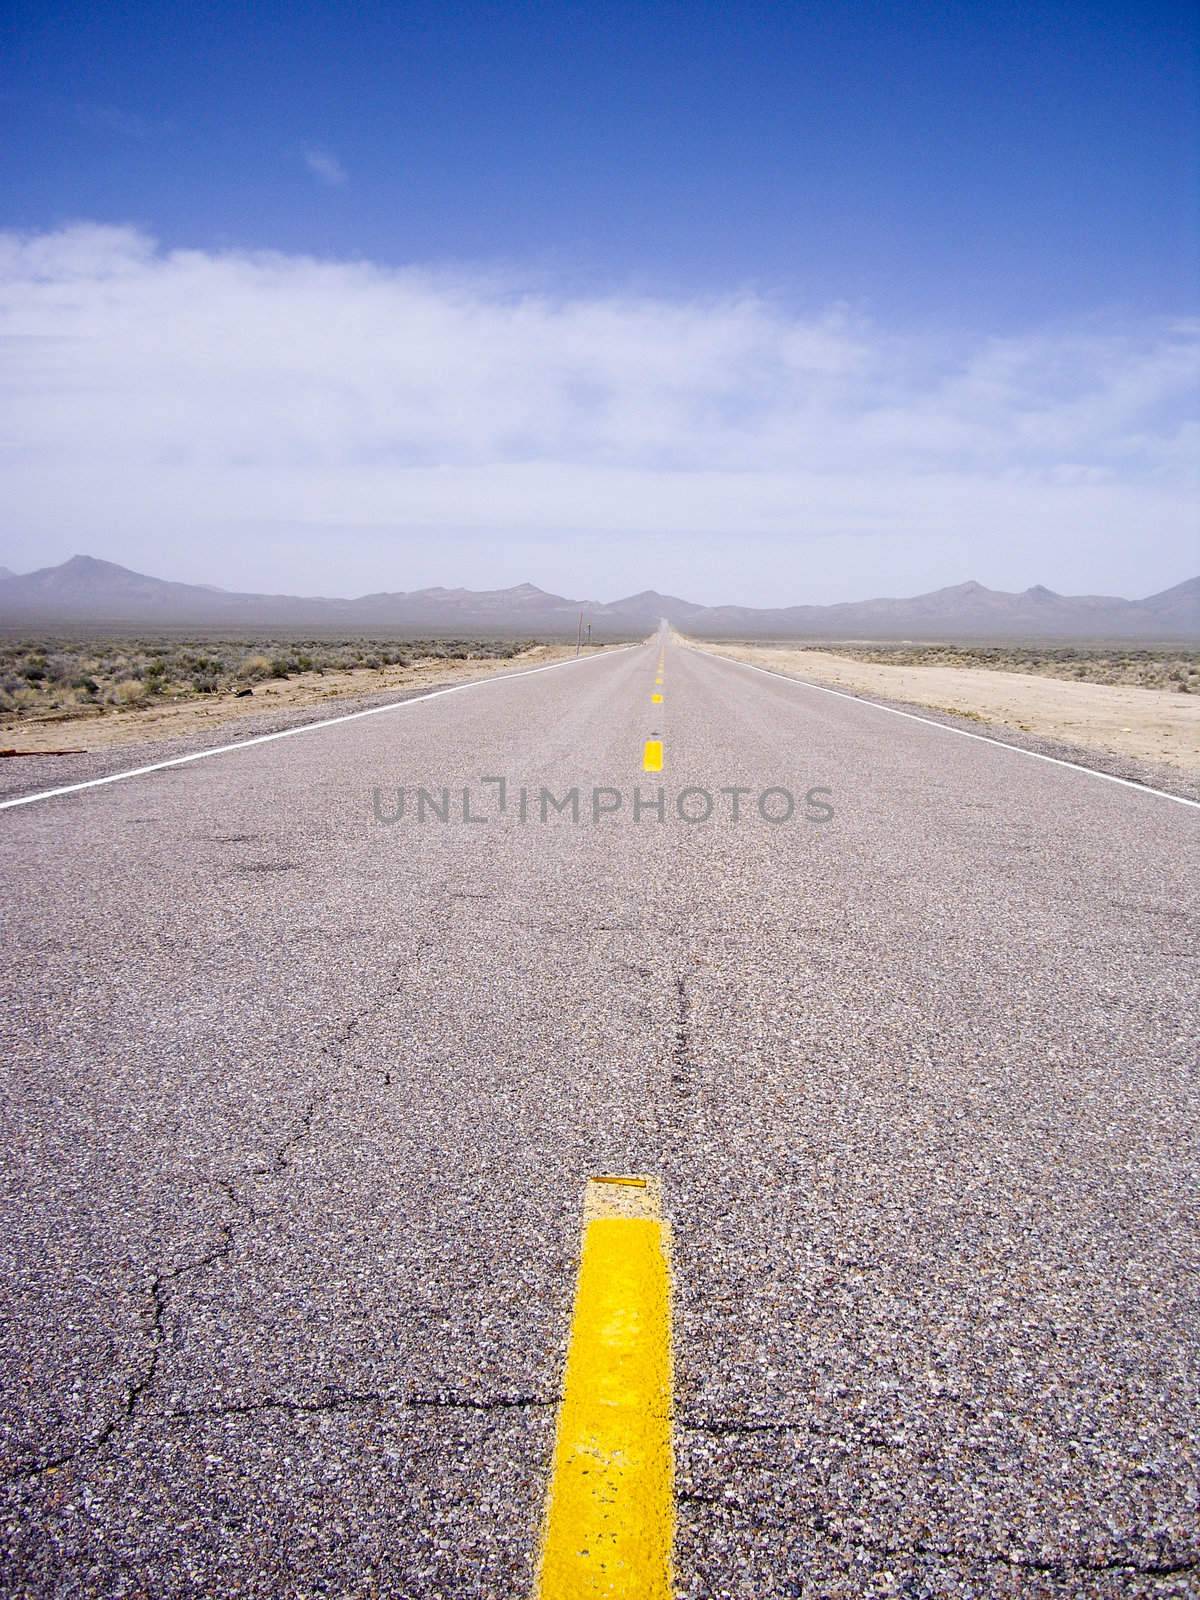 Yellow stripes lead the way on empty desert highway